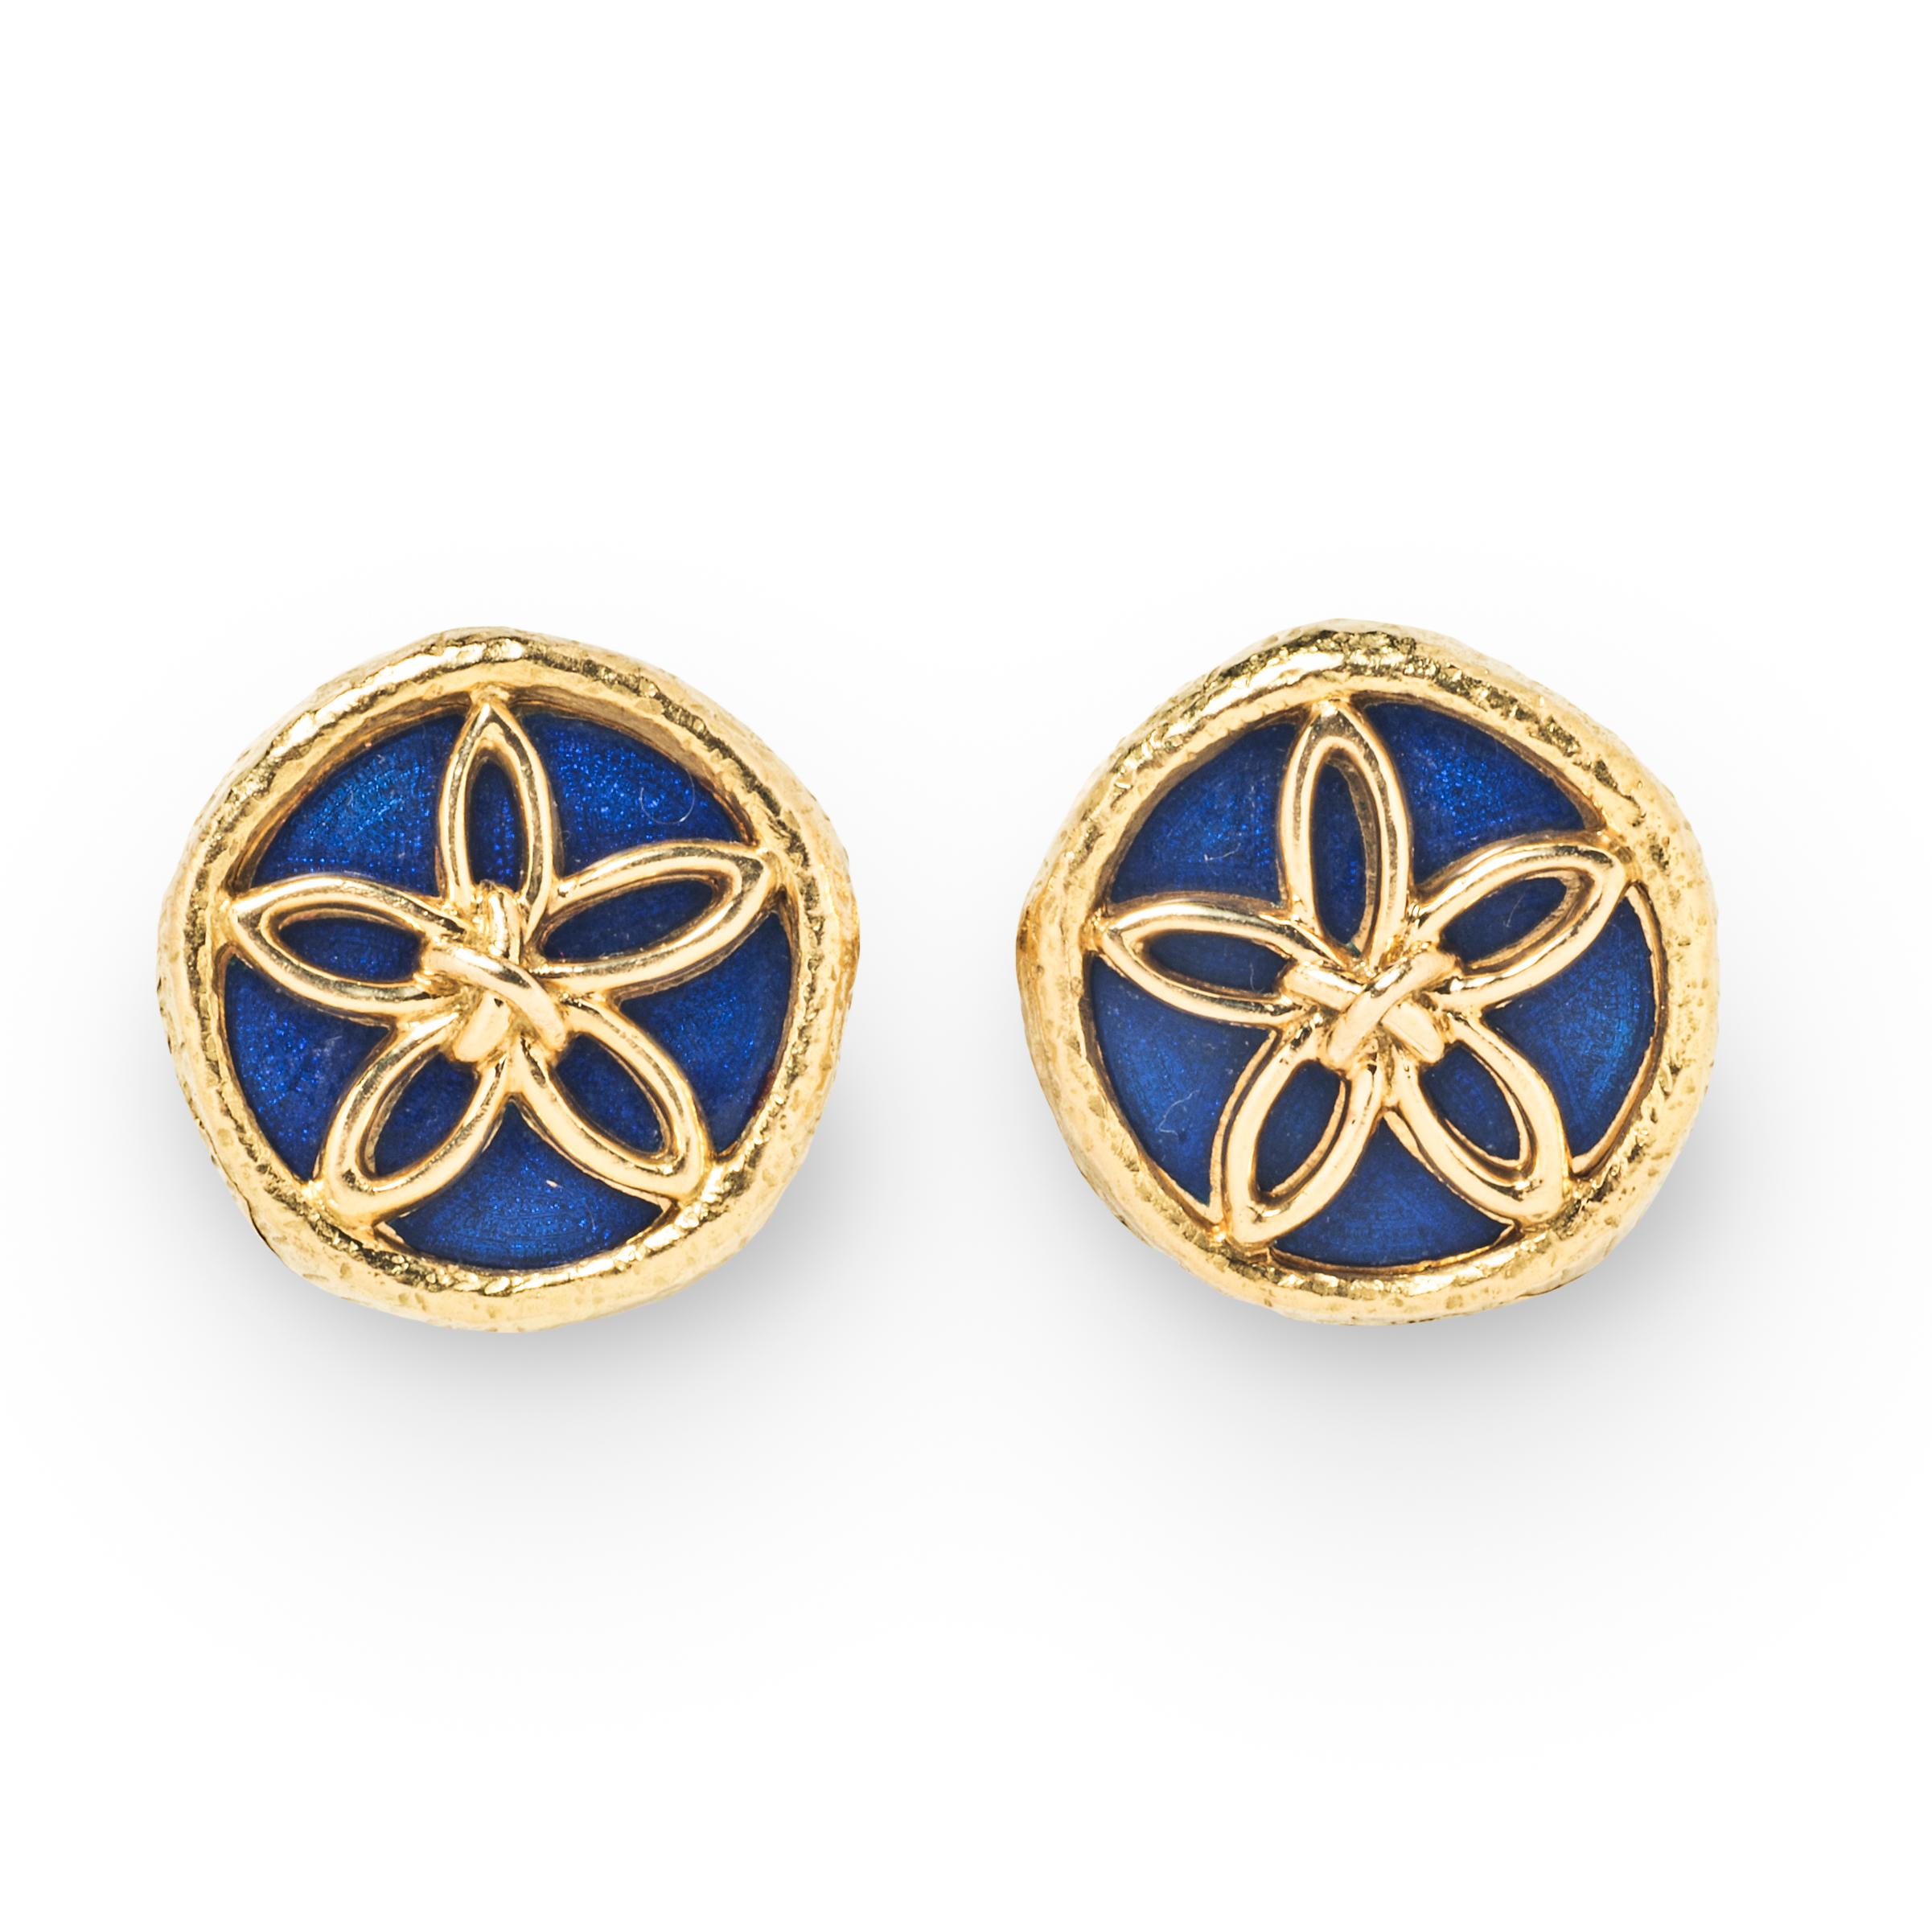 Like sketches in gold, Jean Schlumberger’s graceful flowers adorn deep blue lapis discs set within hammered gold frames in these refined and stylish cufflinks.

- .8125” diameter
- 18K yellow gold
- Signed Tiffany, Schlumberger